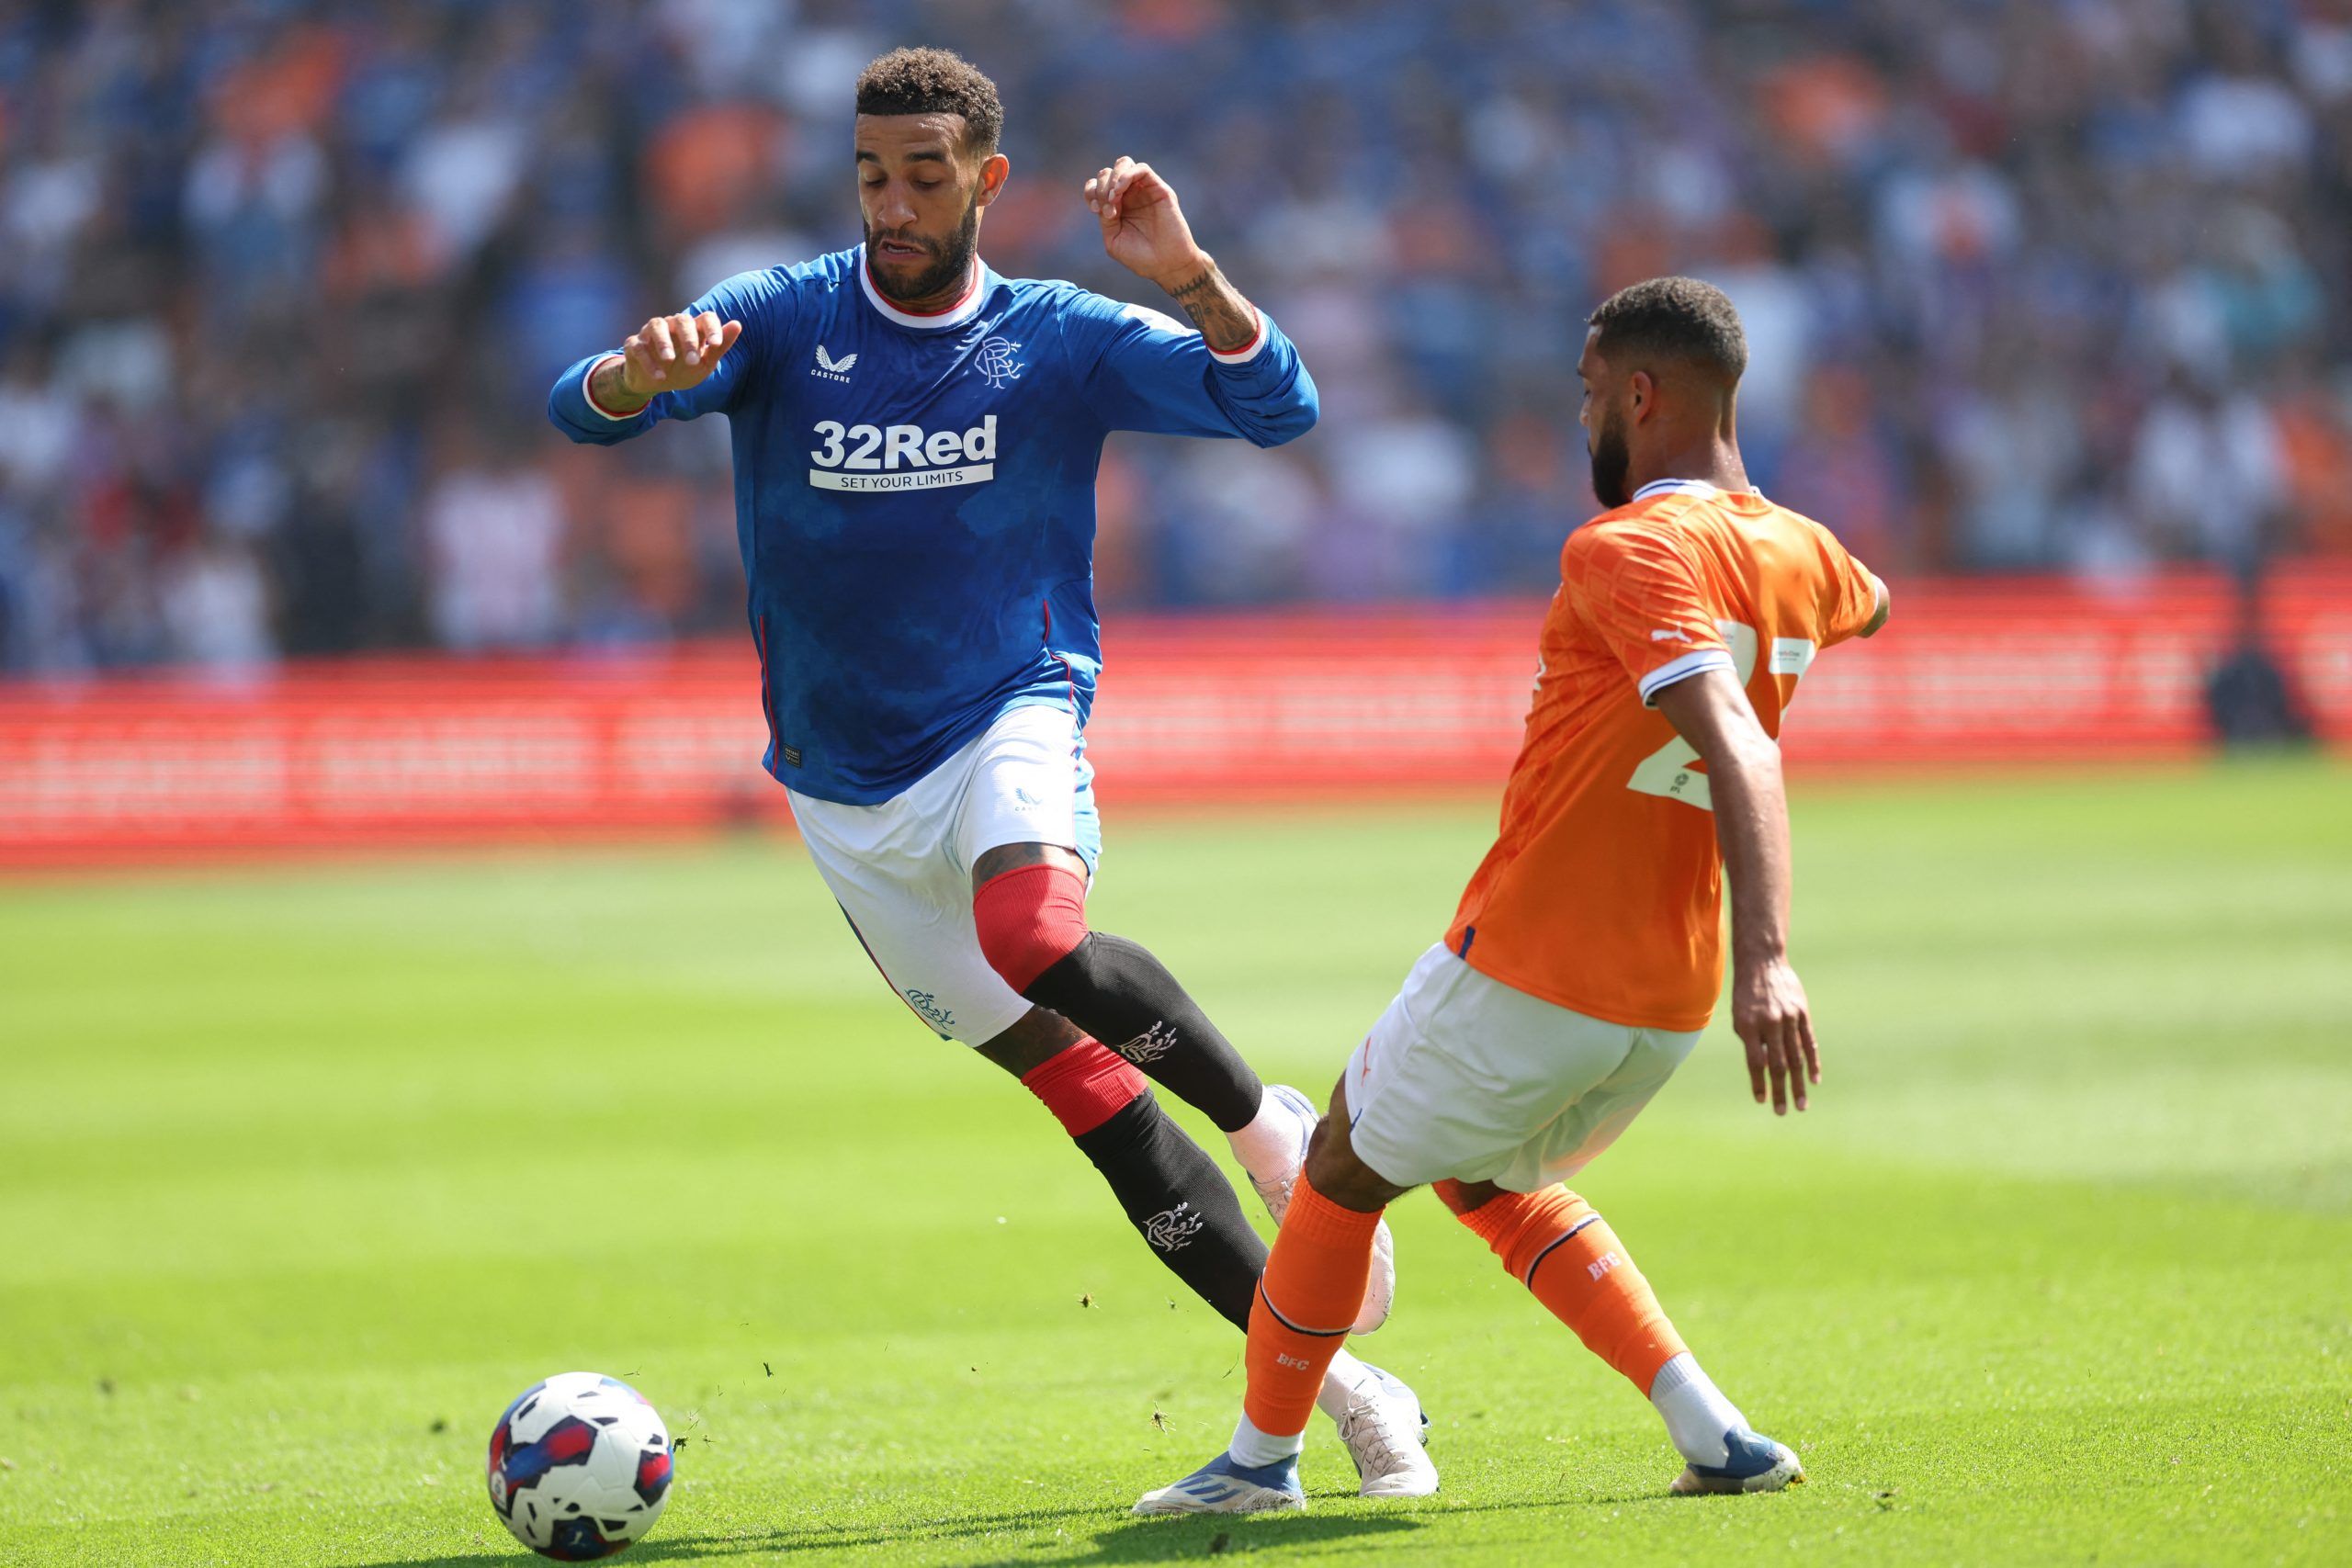 Soccer Football - Pre Season Friendly - Blackpool v Rangers - Bloomfield Road, Blackpool, Britain - July 16, 2022 Rangers' Connor Goldson in action with Blackpool's CJ Hamilton Action Images via Reuters/Carl Recine